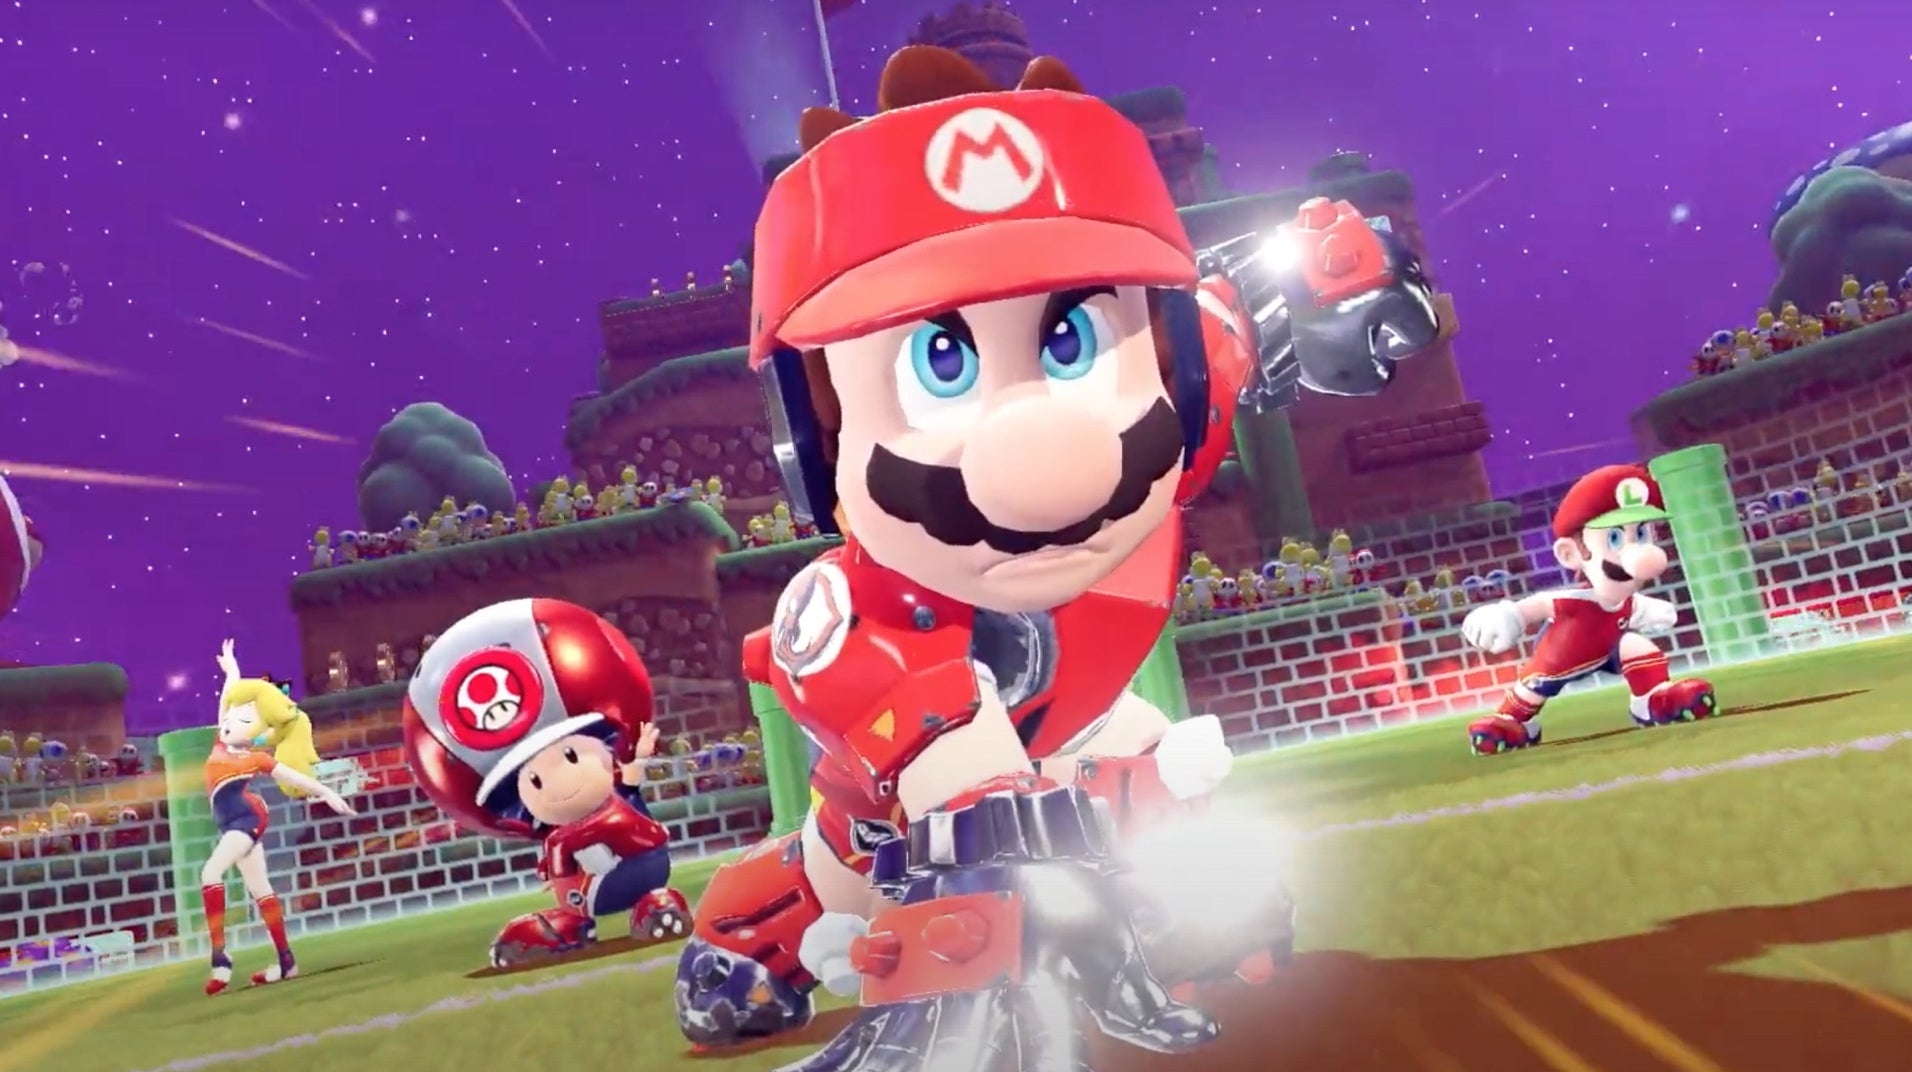 Mario Strikers is back in Battle League, coming to Switch this June - Eurogamer.net